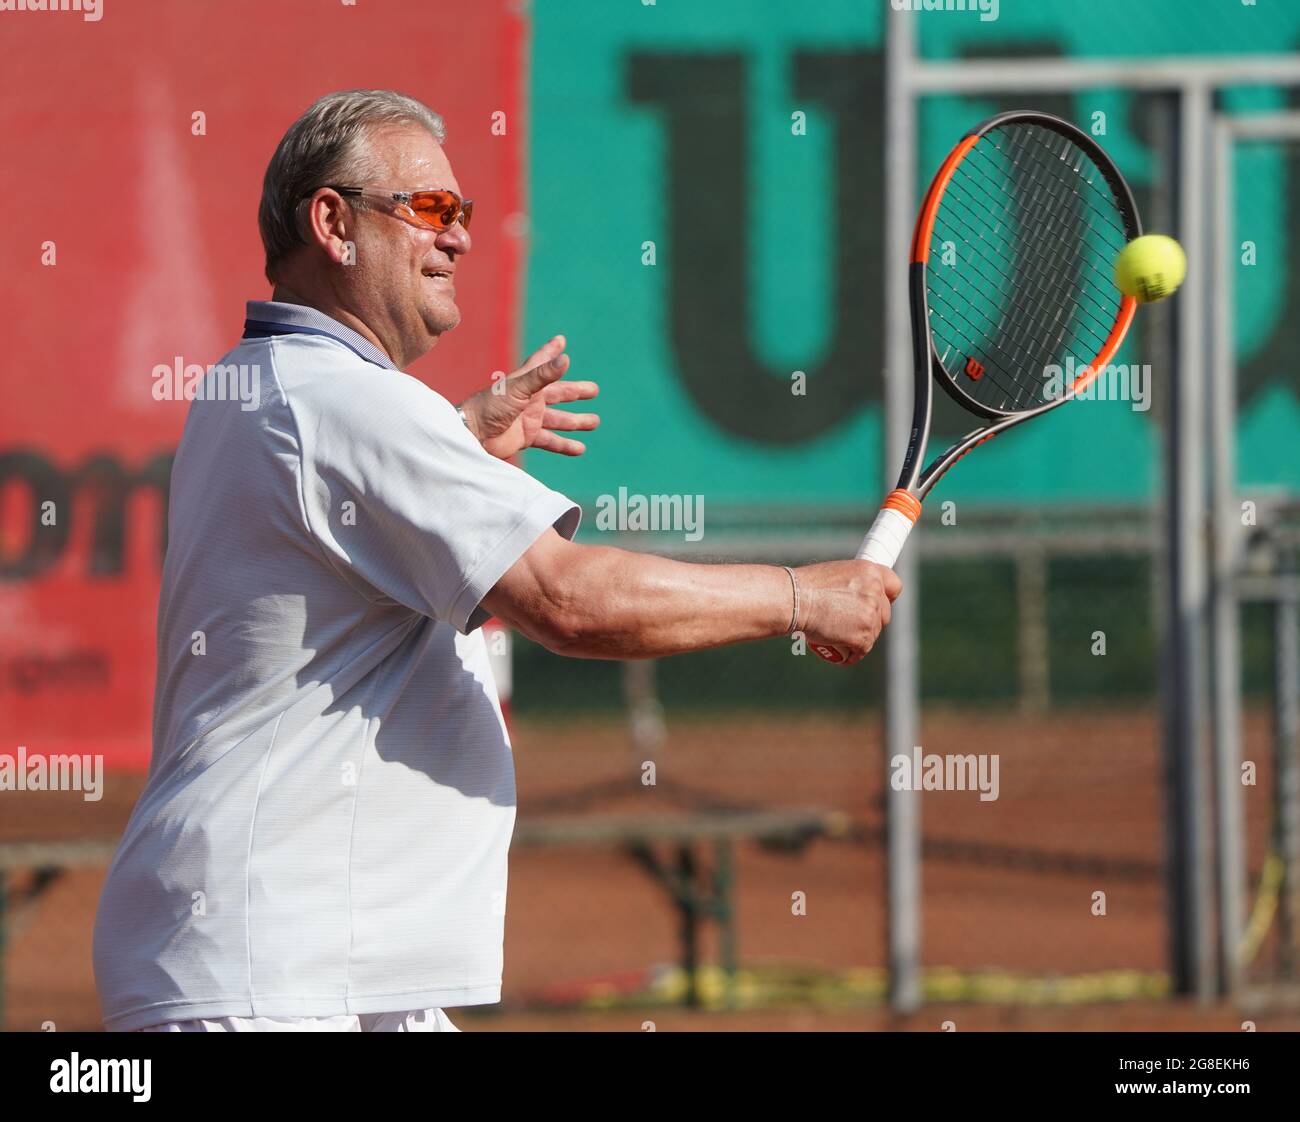 Hamburg, Germany. 15th July, 2021. Frank Pagelsdorf, former coach of  Hamburger SV and Hansa Rostock, hits a ball on the tennis court of SC  Condor. Credit: Marcus Brandt/dpa - IMPORTANT NOTE: In